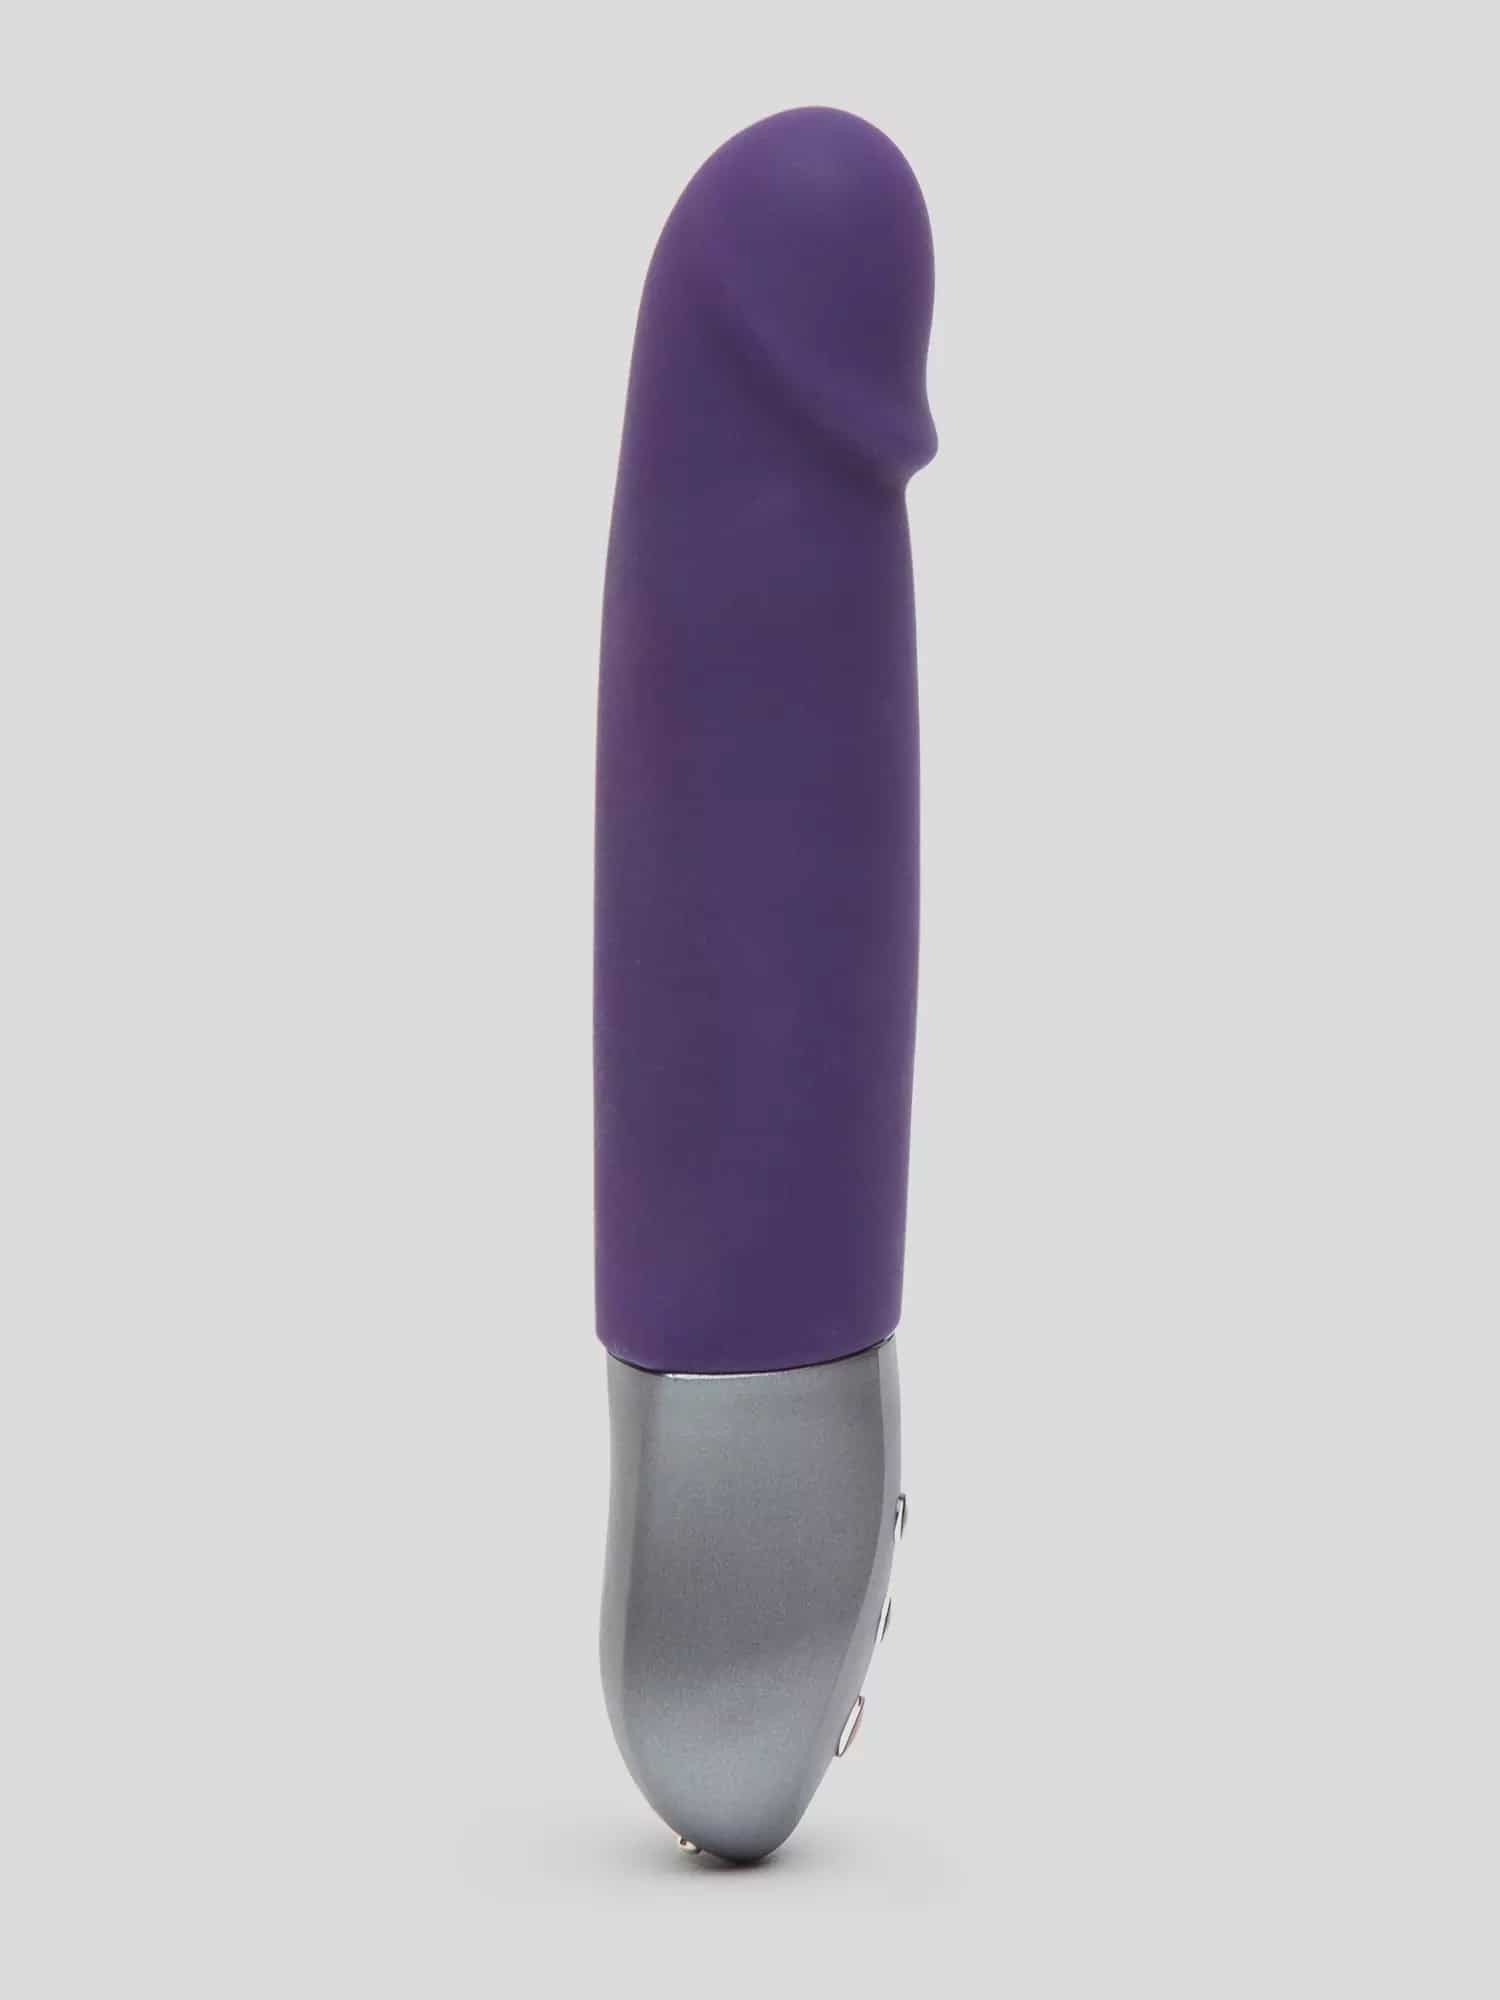 Fun Factory Stronic Real Rechargeable Realistic Thrusting Vibrator. Slide 2